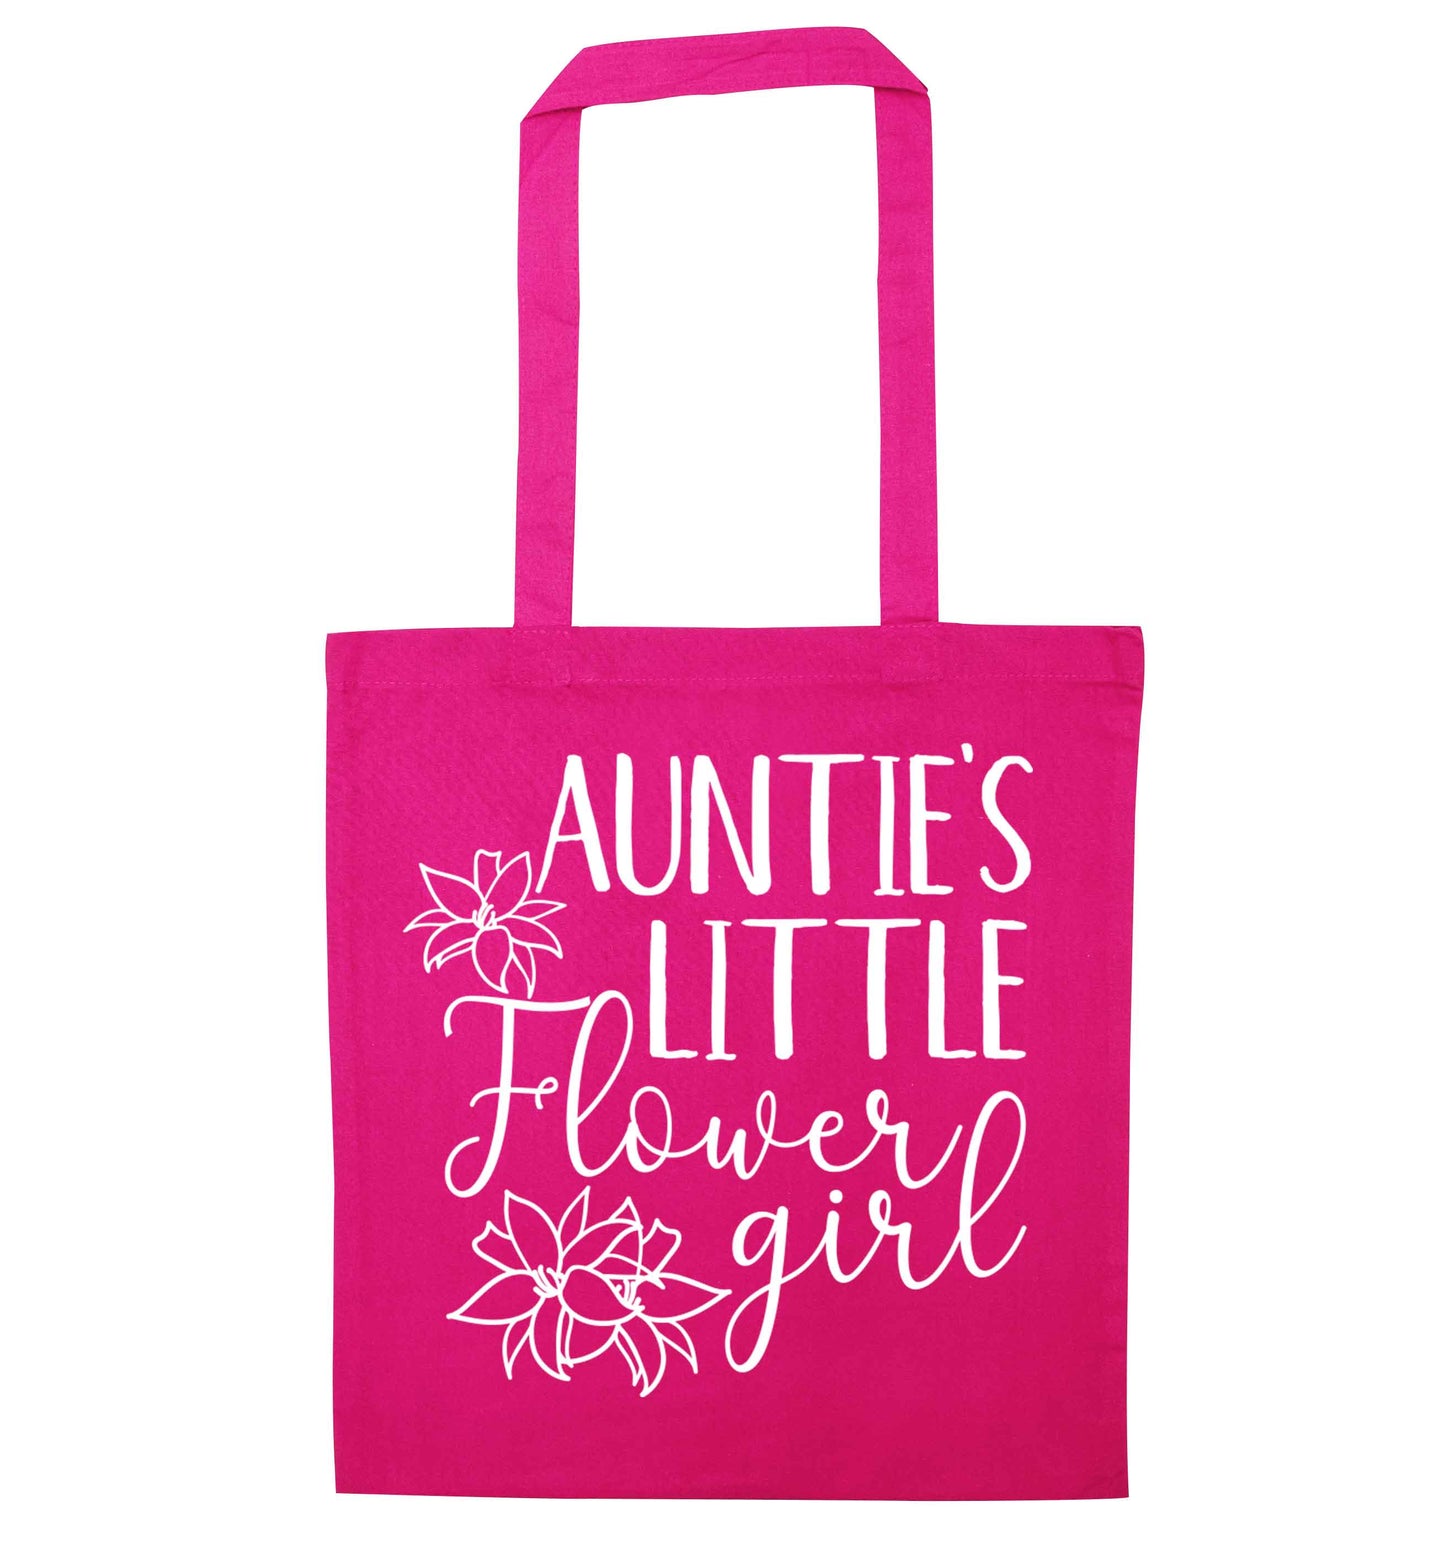 Perfect wedding guest favours or hen party gifts! Personalised bridal floral wreath designs, any name, any role! pink tote bag